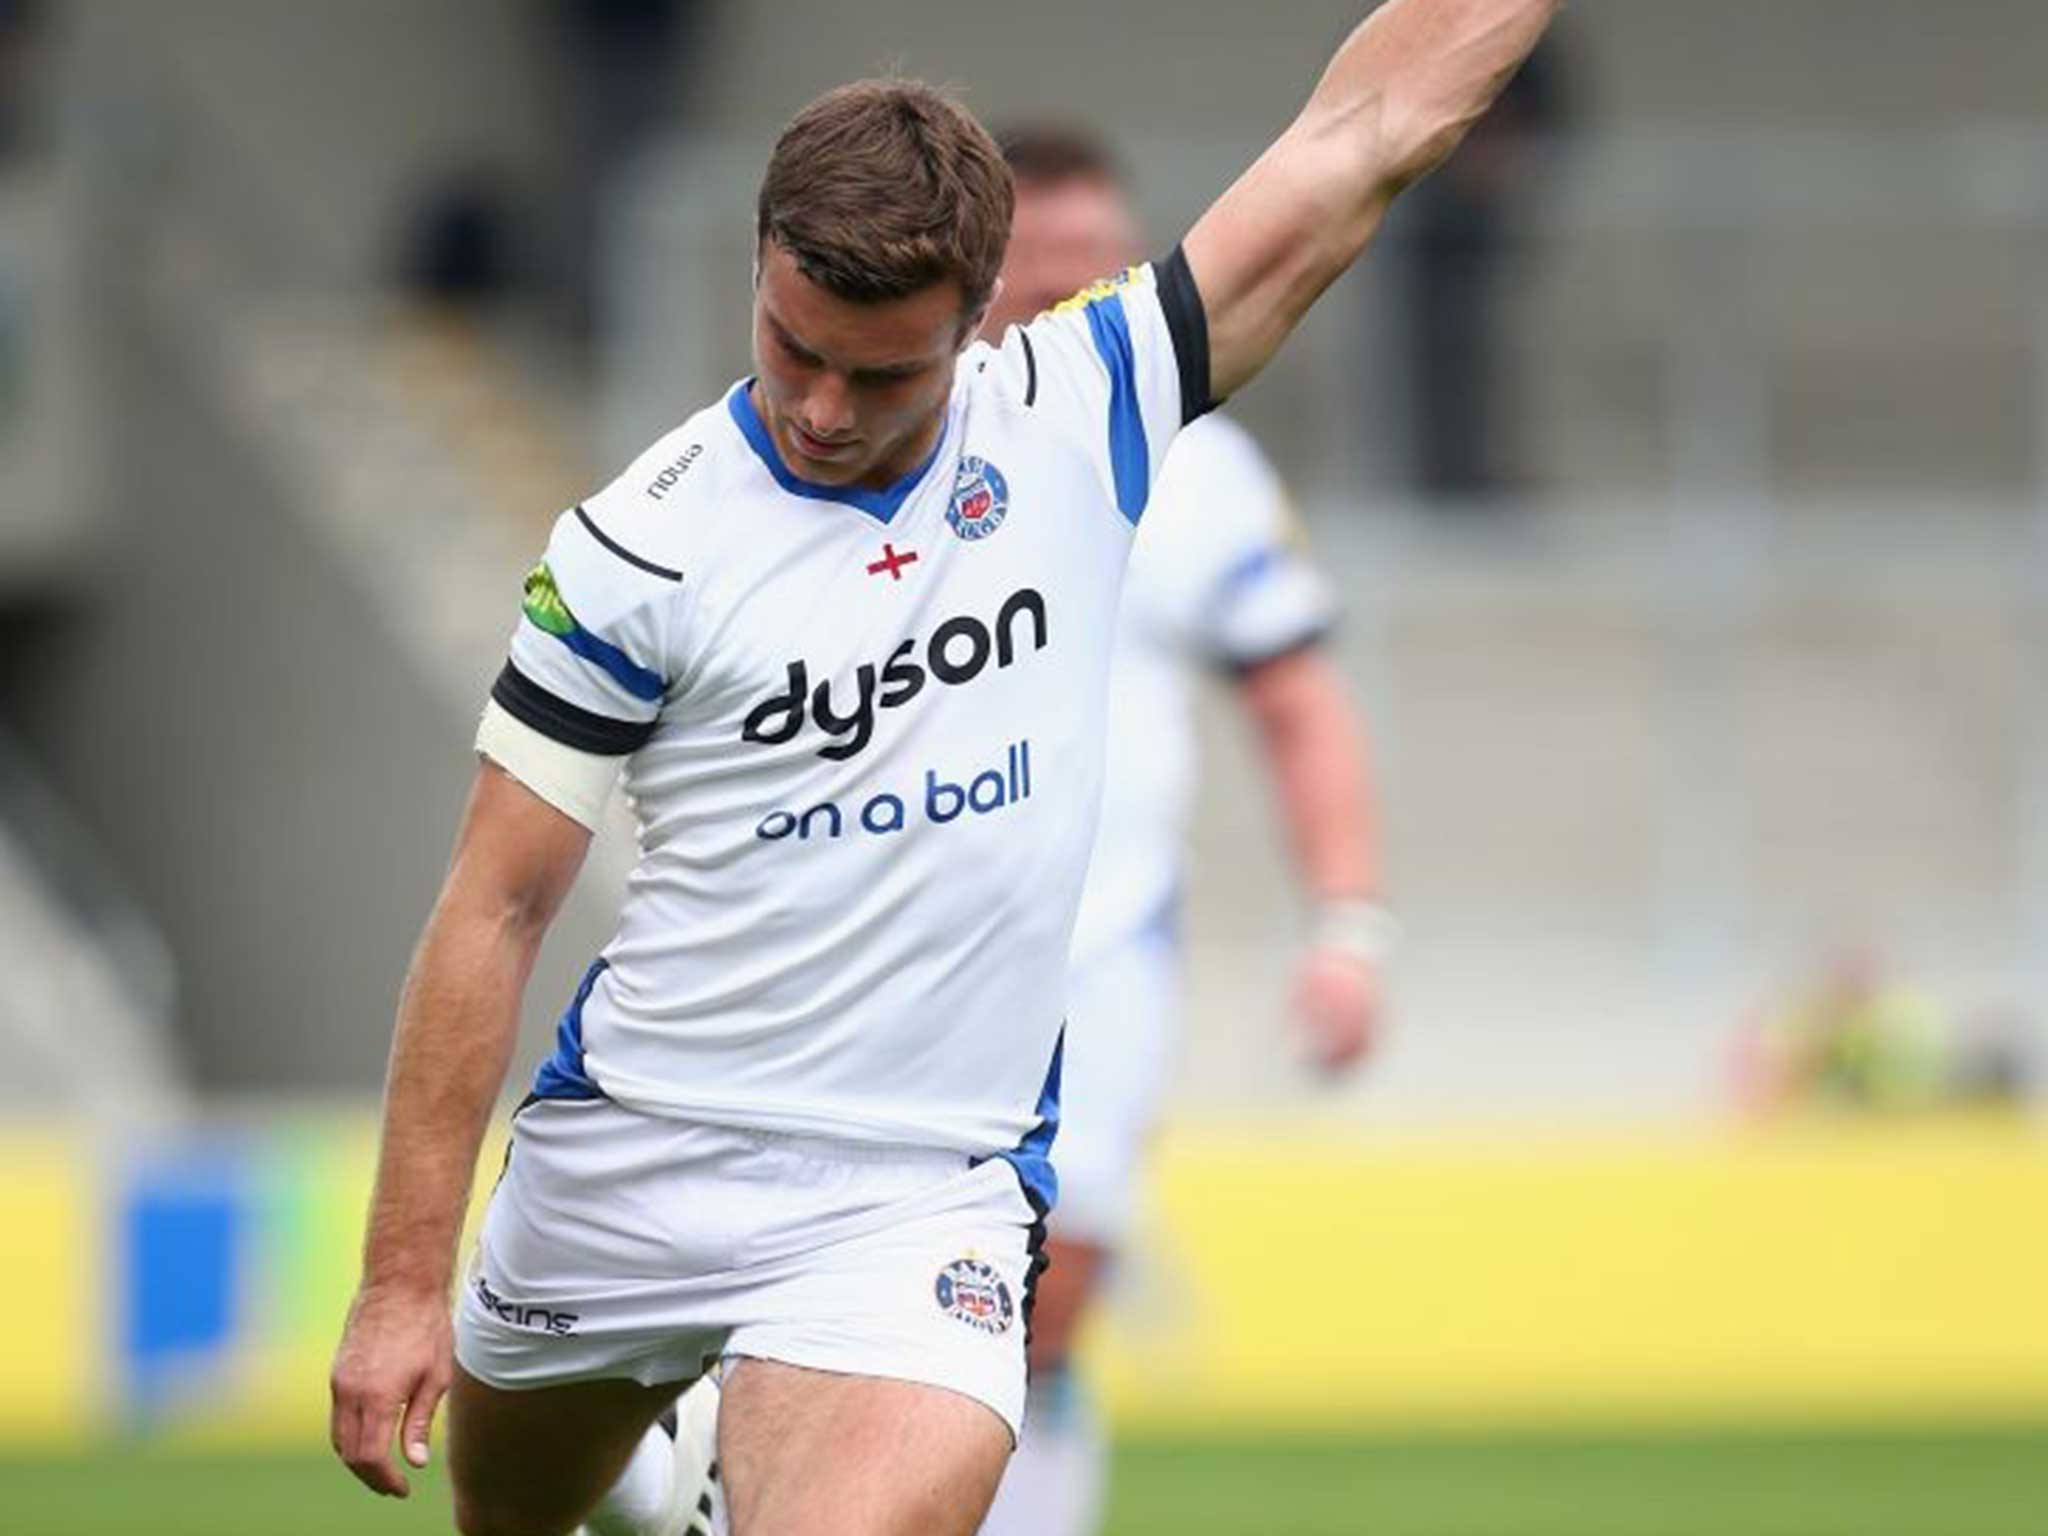 George Ford landed six penalties and two conversions in Bath’s victory over Sale